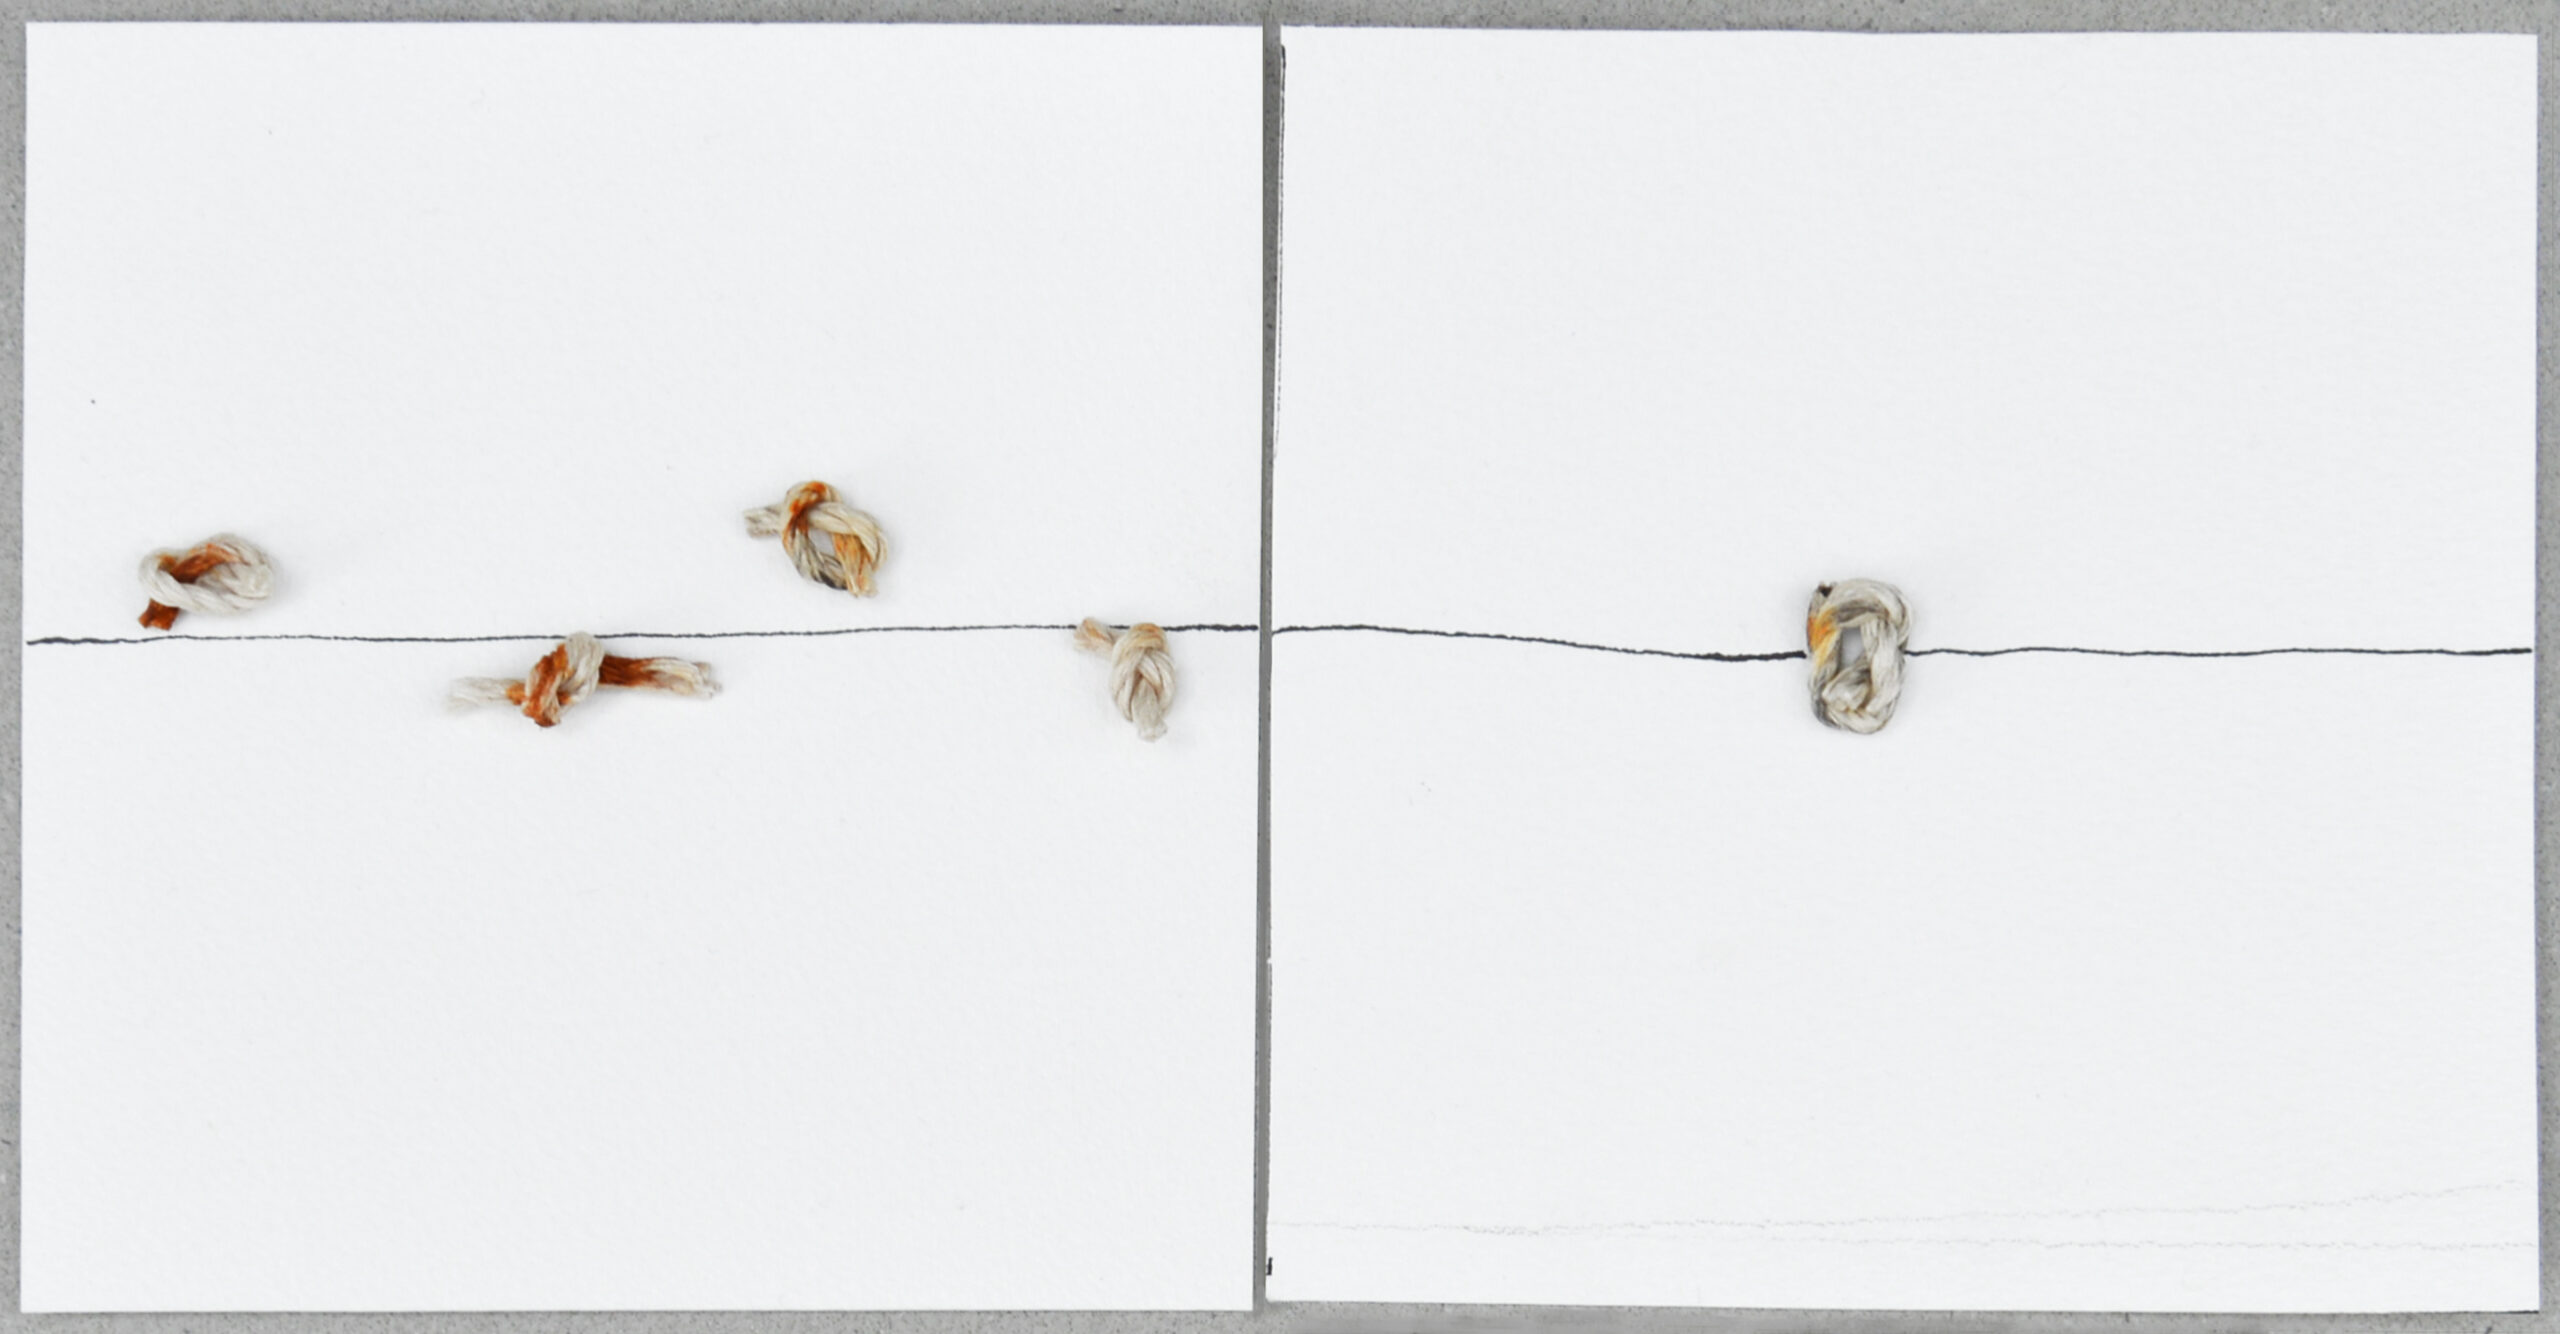 UNTITLED (TR866), 2019 mixed media on paper, diptych, 4 x 8 1/4 in